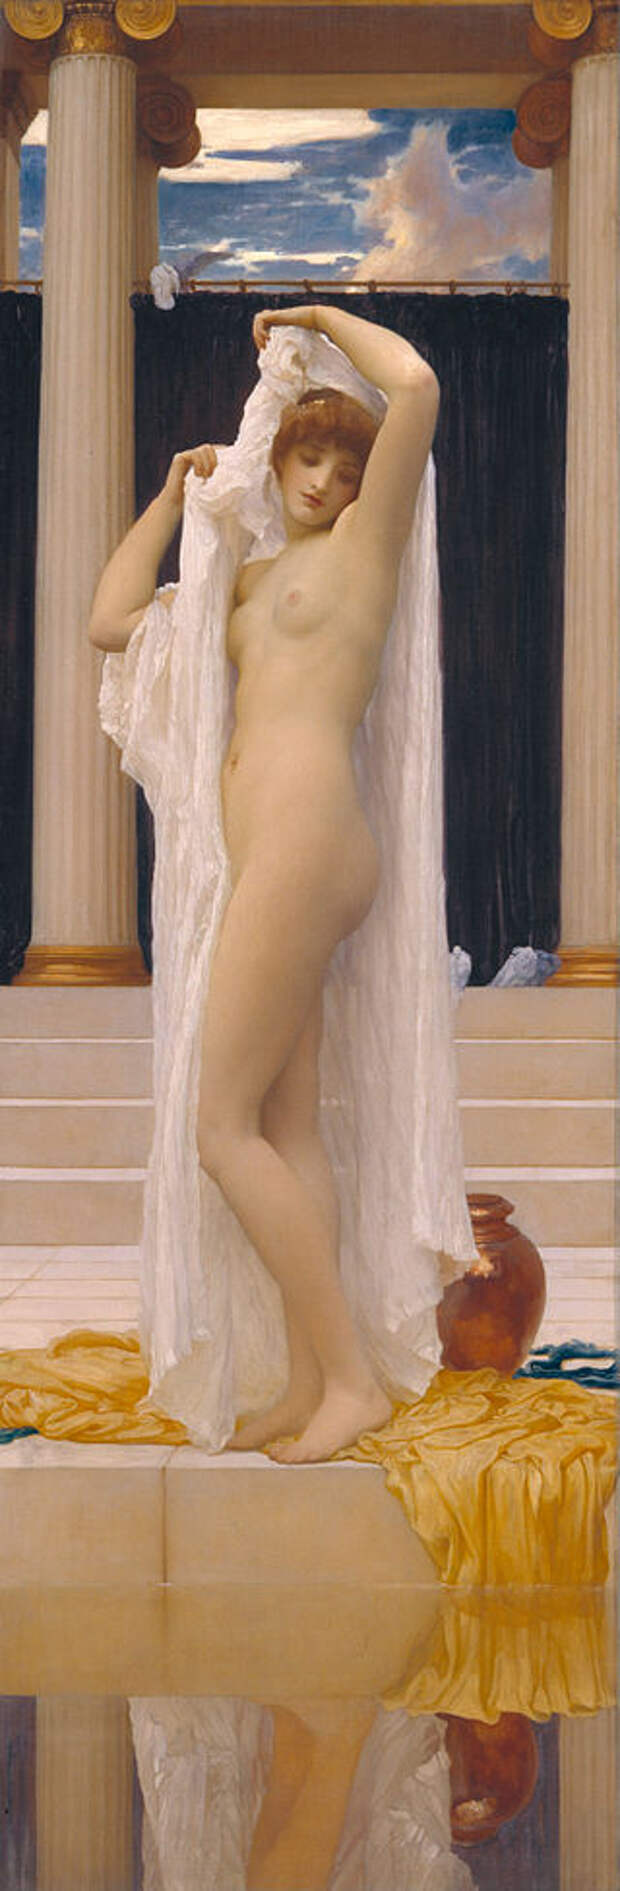 320px-Frederic_Lord,_Leighton_-_The_Bath_of_Psyche_-_Google_Art_Project.jpg